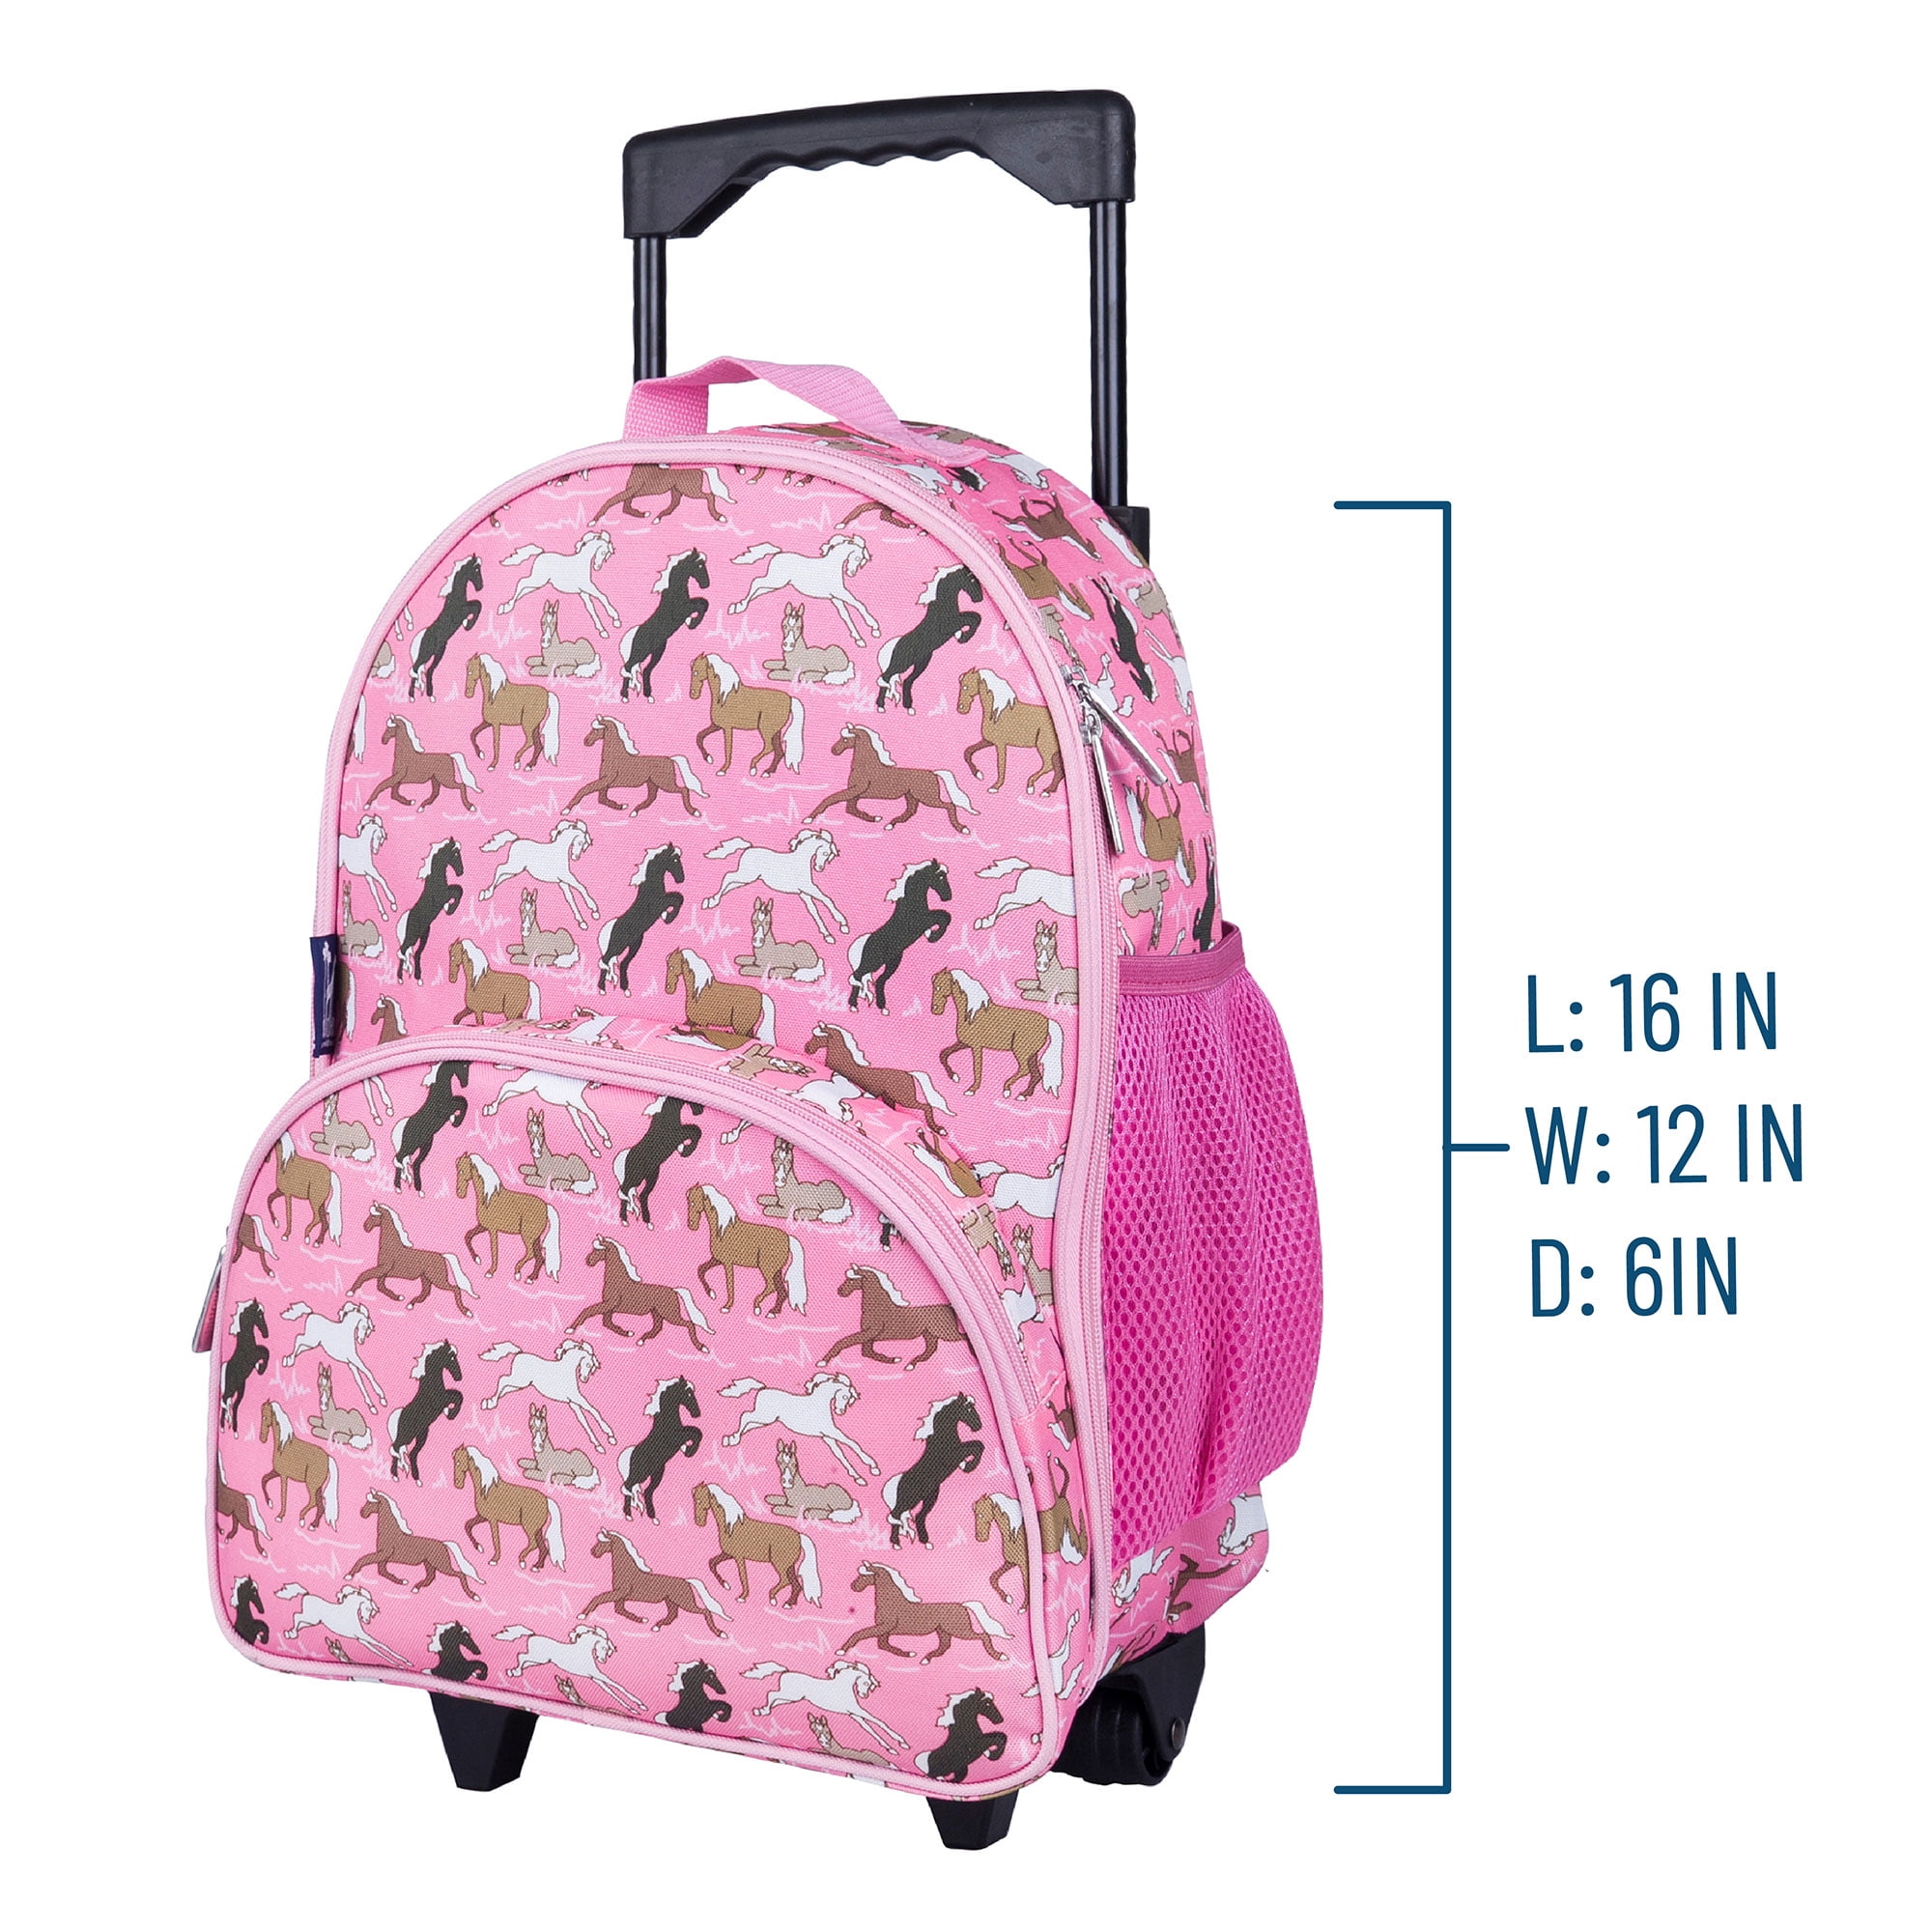 Backpack - Fairy Horses Mini - Small pink backpack with horse